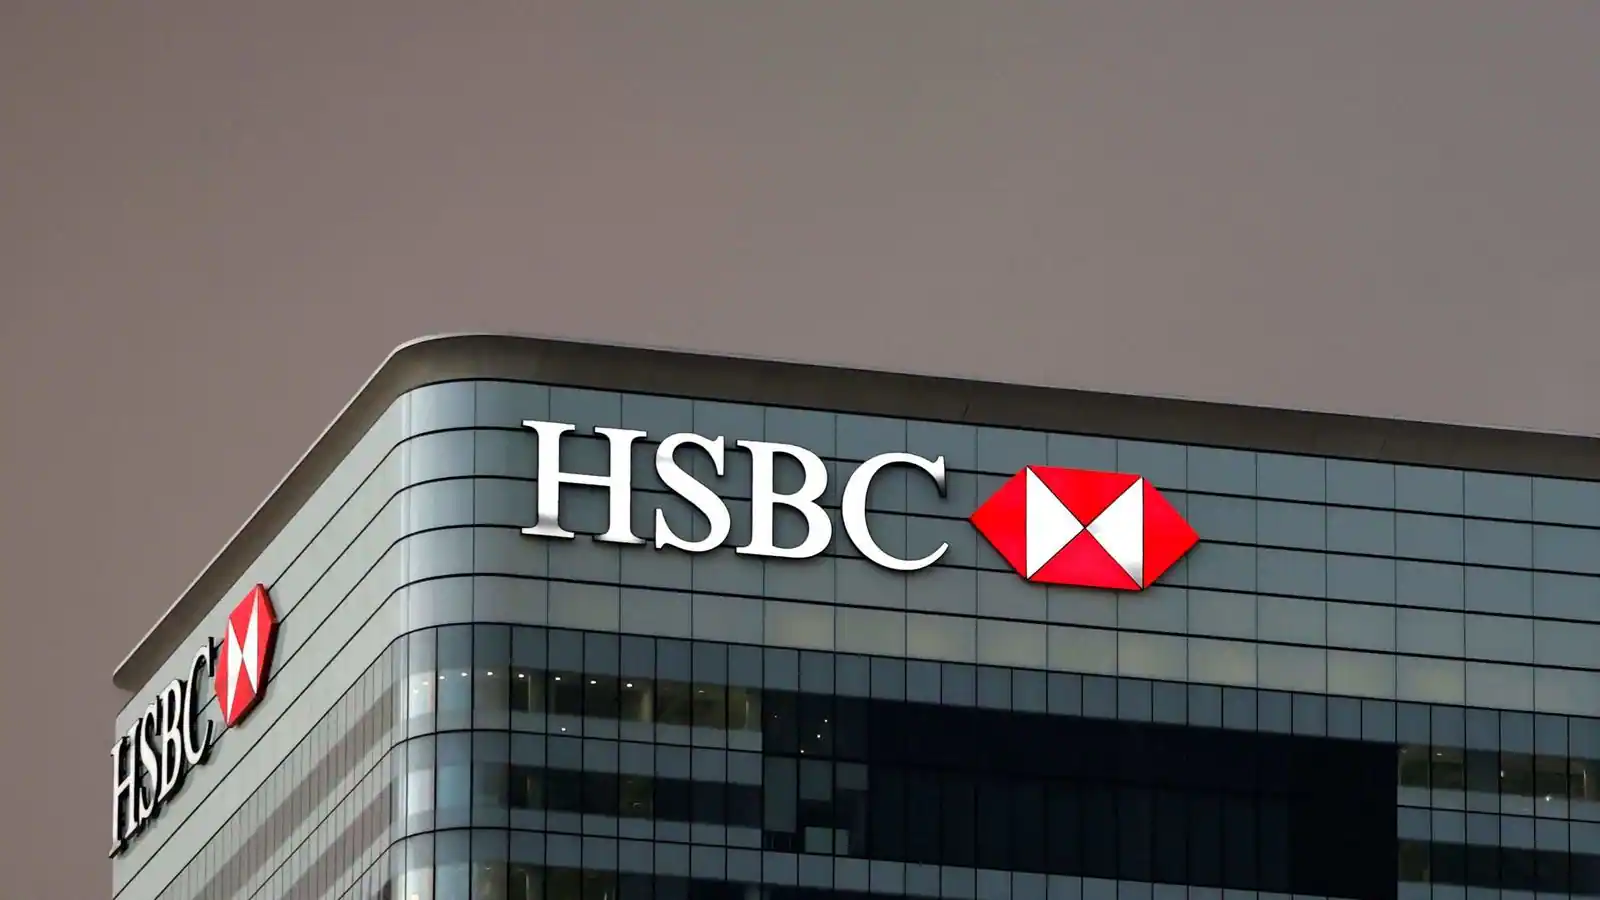 HSBC Bank Australia paid A$33,000 in penalties after the ACCC issued two infringement notices for alleged violations of Consumer Data Right (CDR) rules.